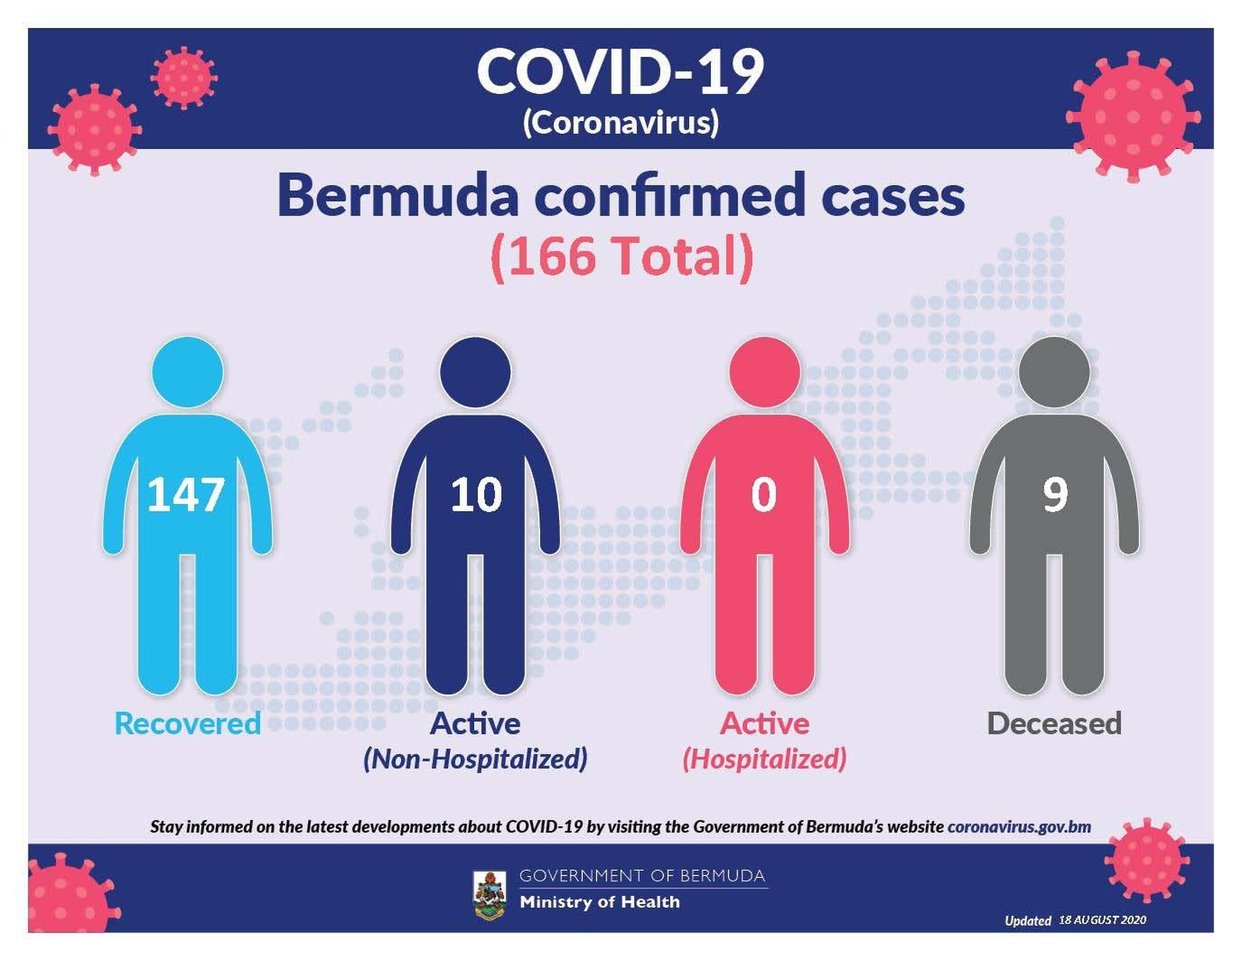 No new COVID-19 cases detected in Bermuda, 19 August